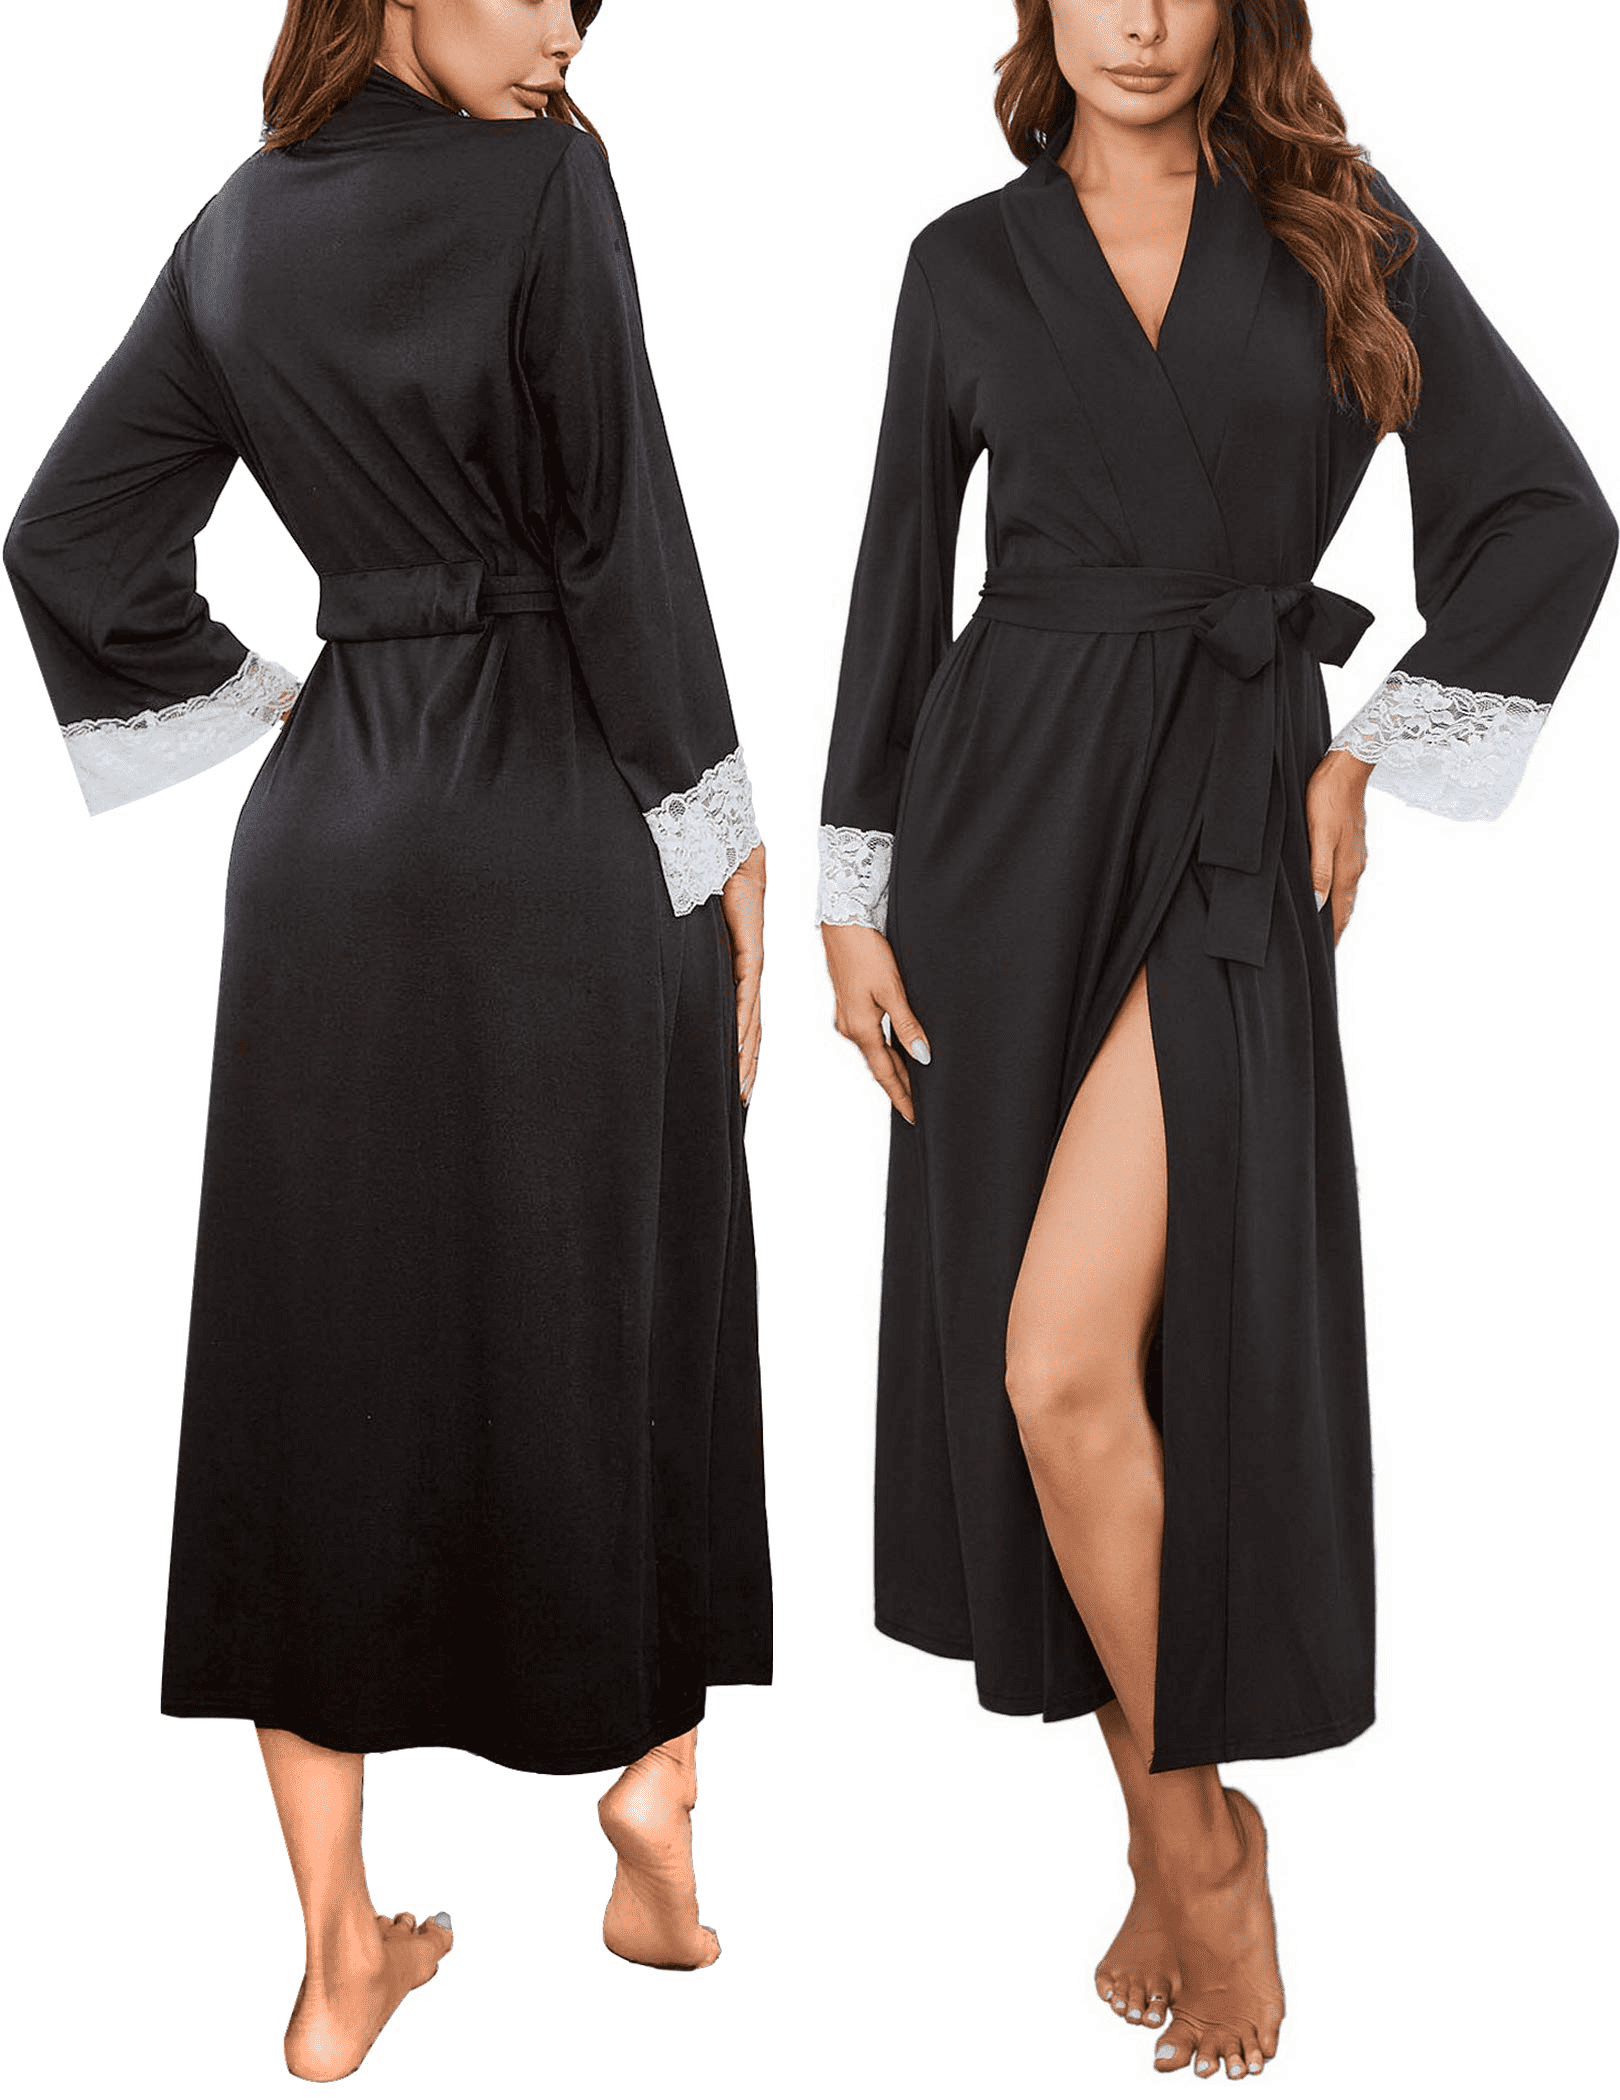 Womens Clothing Nightwear and sleepwear Robes Nap Synthetic Lightweight Wrap Robe in White robe dresses and bathrobes 